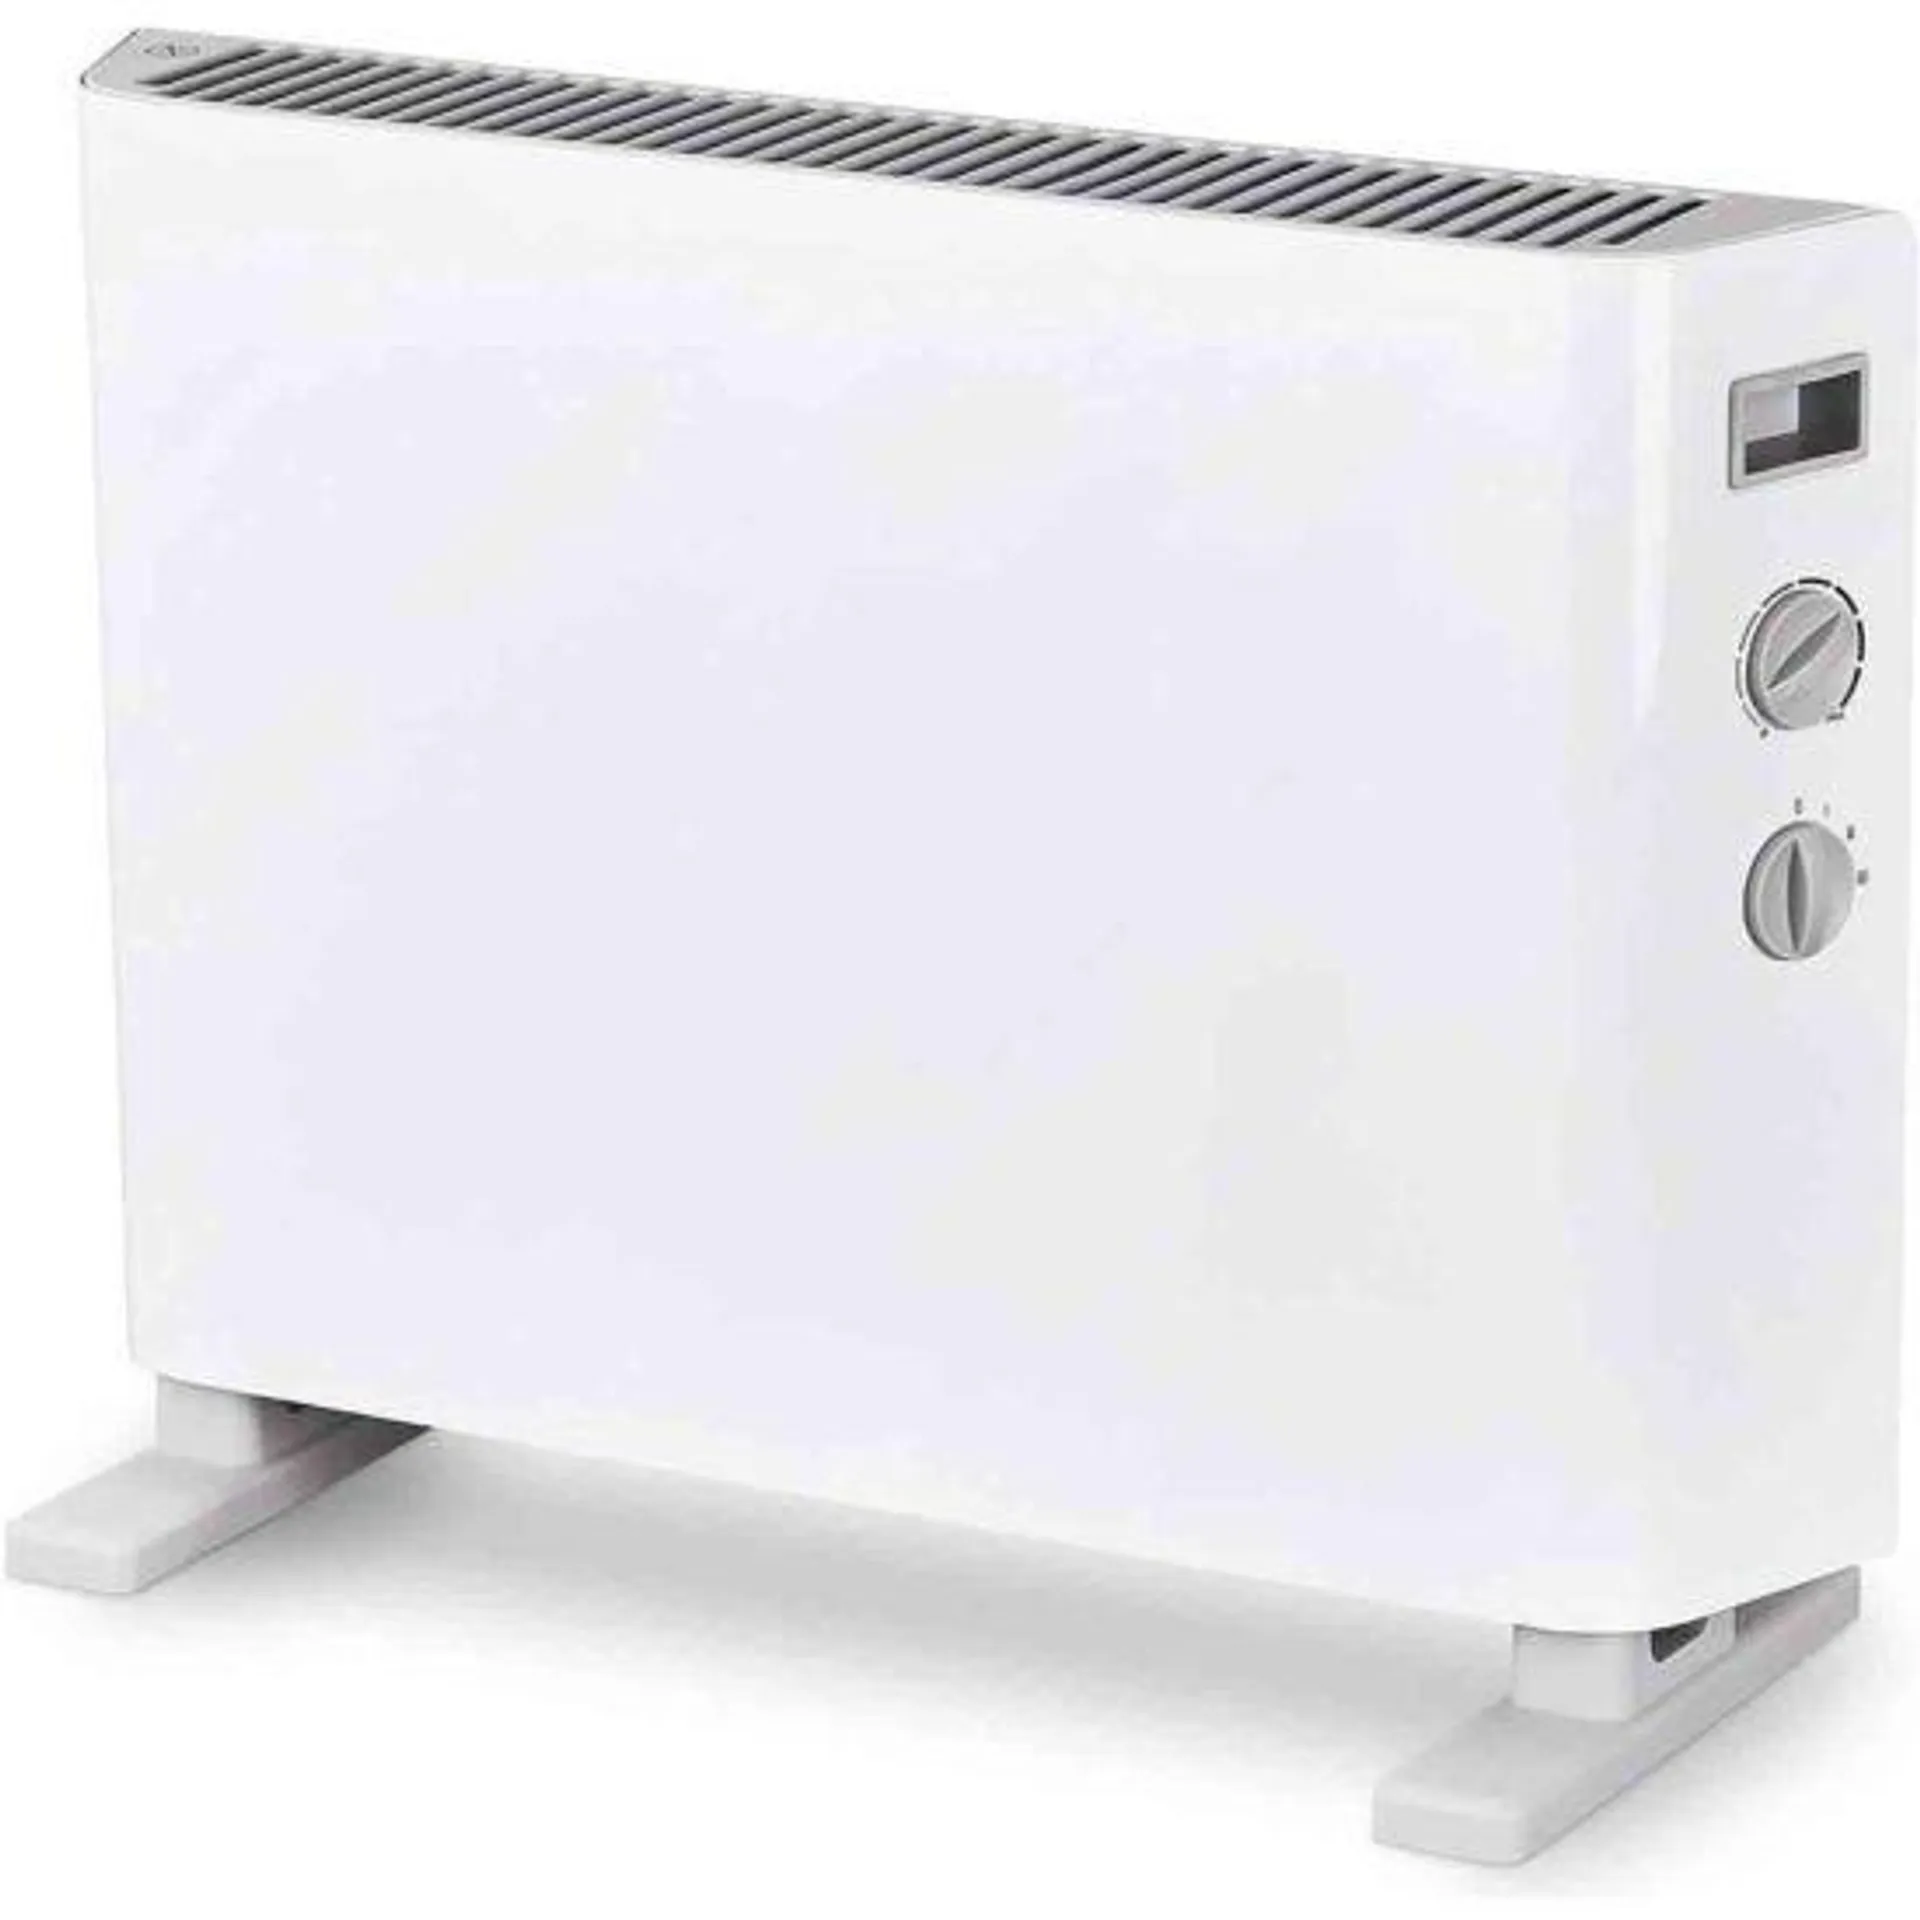 Mylek Convector Heater Electric 2000W Free Standing Radiator - Portable, 3 Power Modes With Adjustable Thermostat/Oil Free Low Energy - For Homes, Offices, Garages, Conservatory And Summerhouse